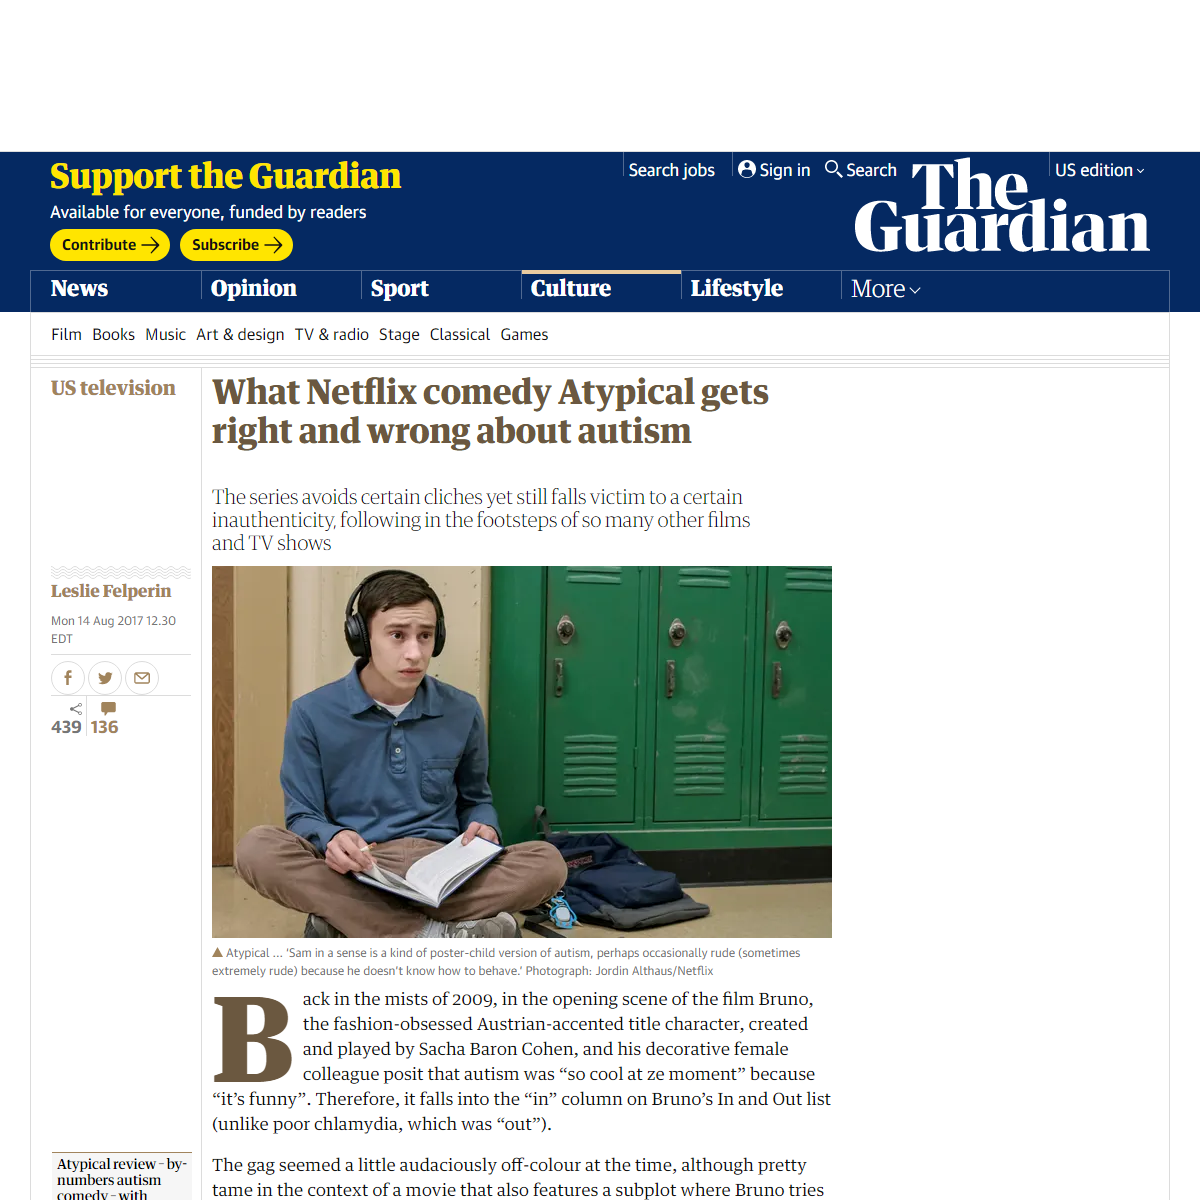 A complete backup of https://www.theguardian.com/tv-and-radio/2017/aug/14/atypical-netflix-autism-spectrum-depiction-cliches